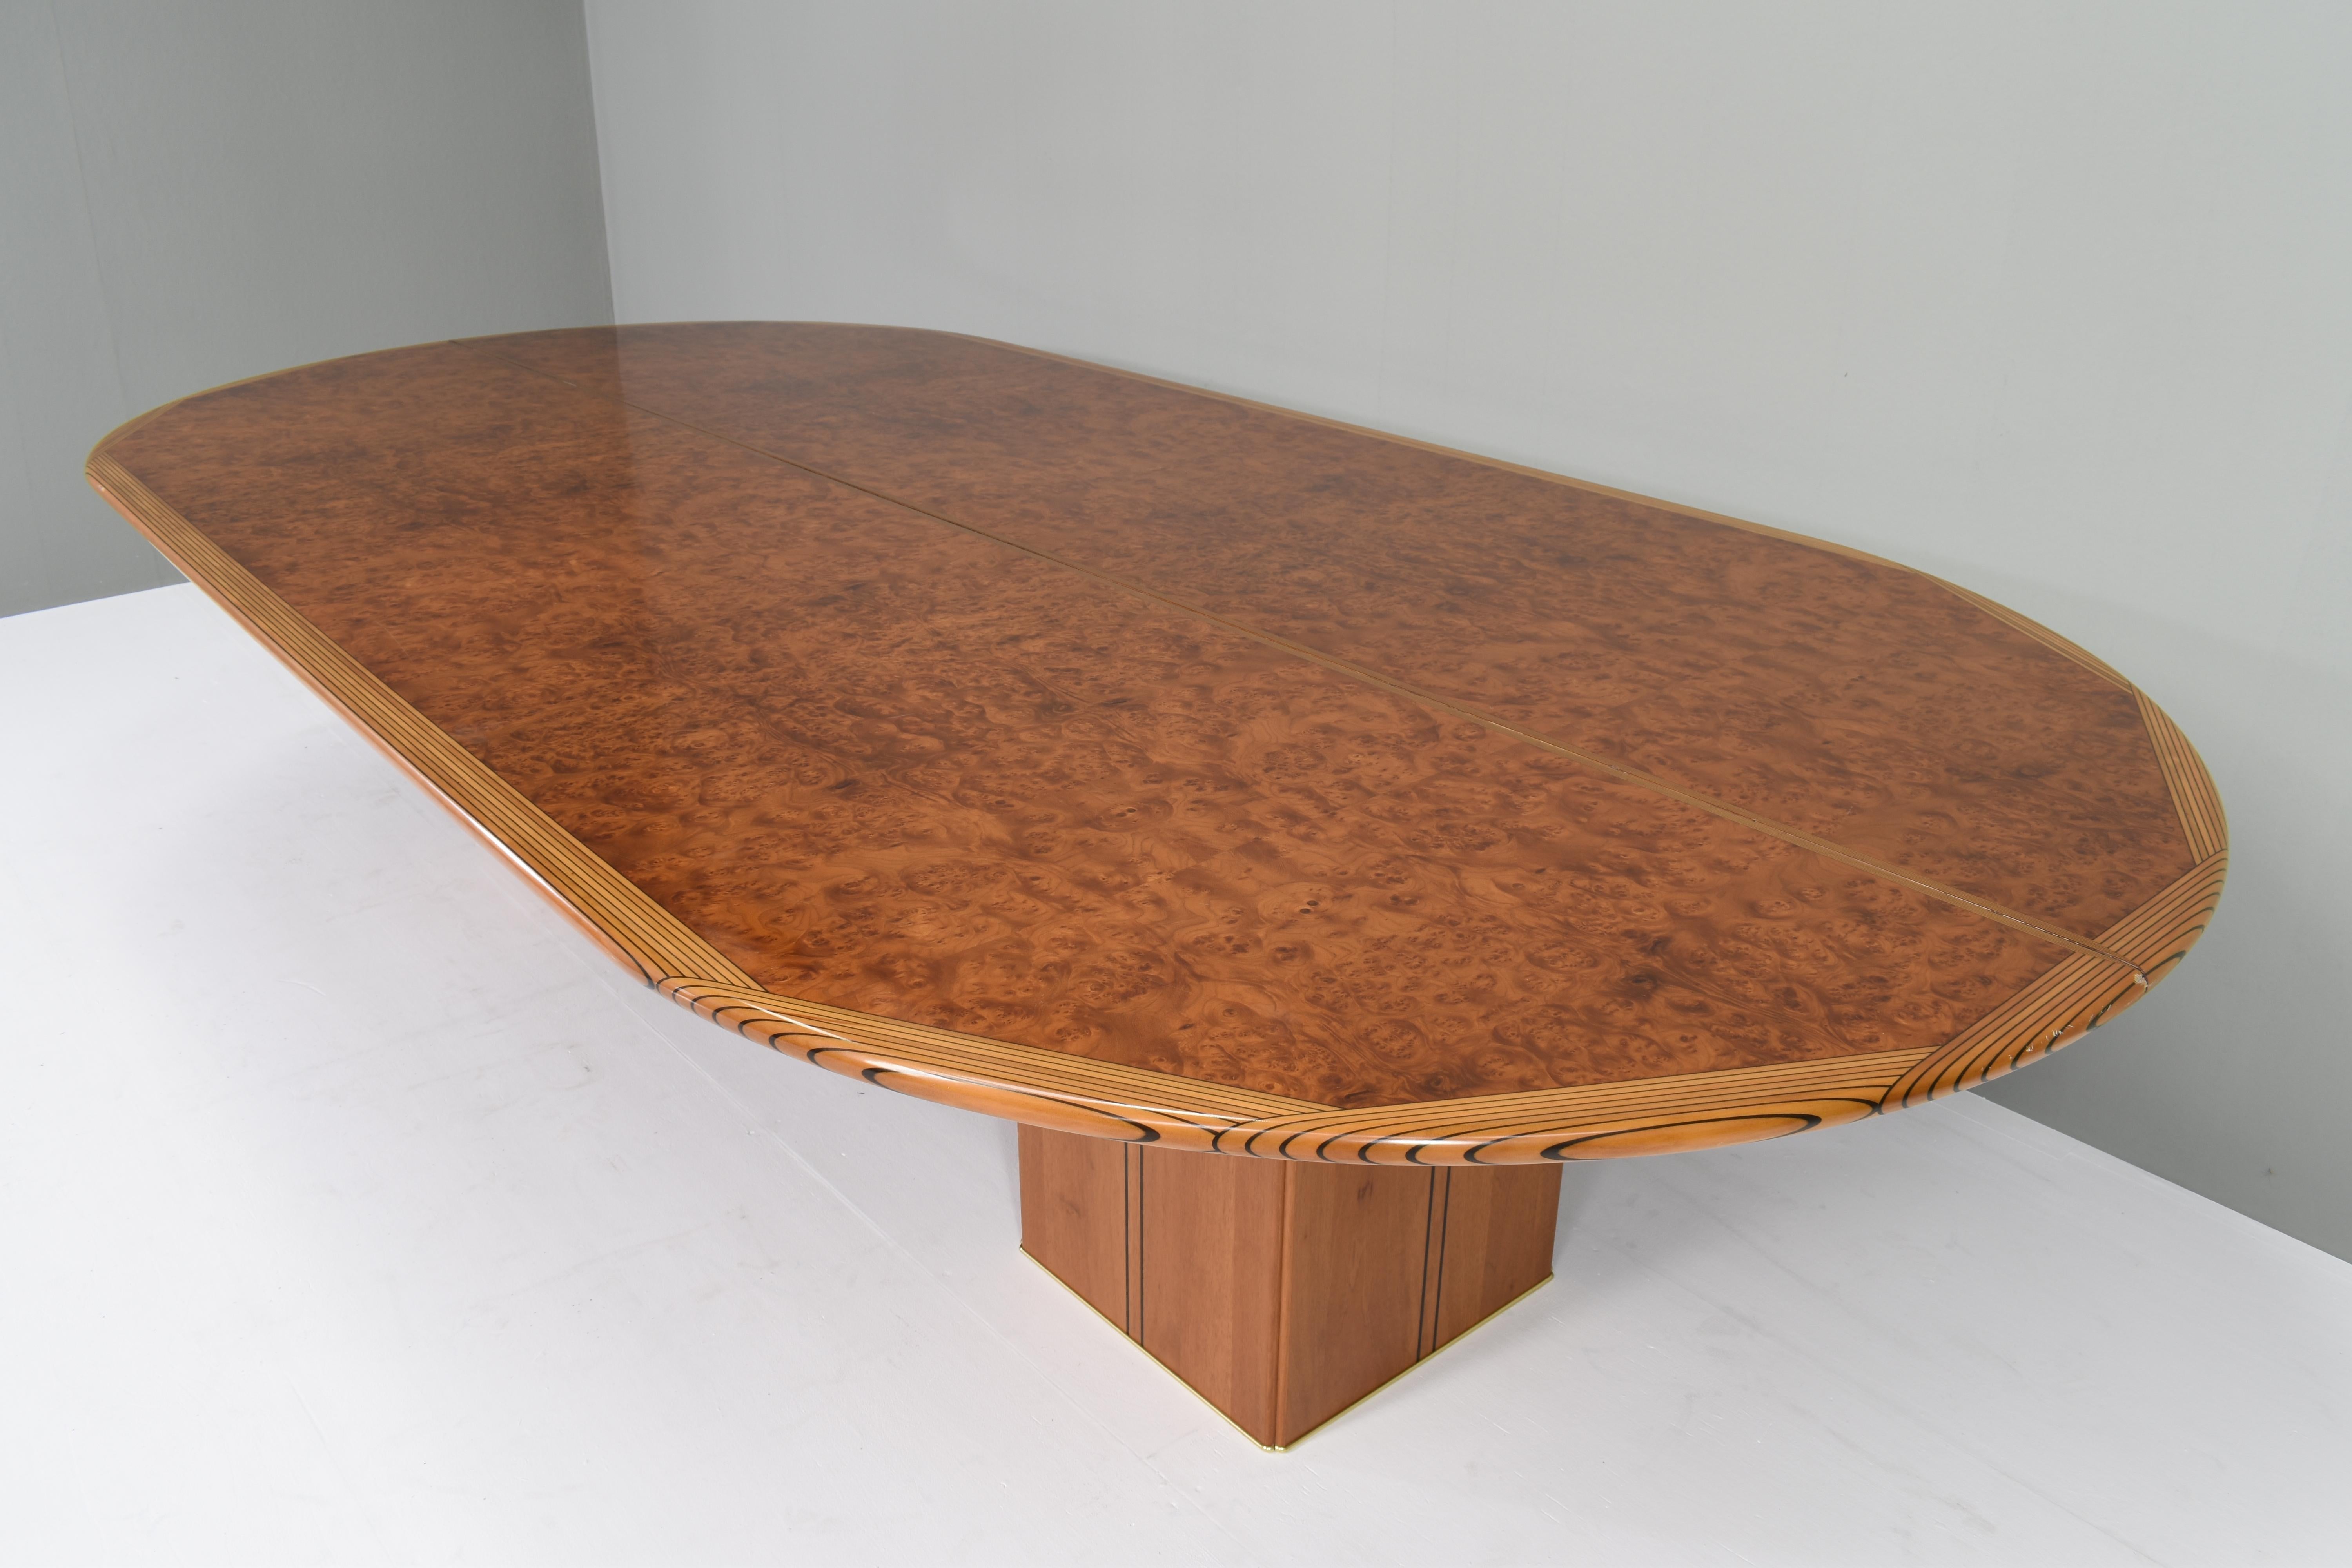 Large Africa series dining / conference table by Afra & Tobia Scarpa for Maxalto, Italy, circa 1970.
The tabletop is made in two pieces which are devided over the lenght. The top is supported by two square legs with brass details. In very good